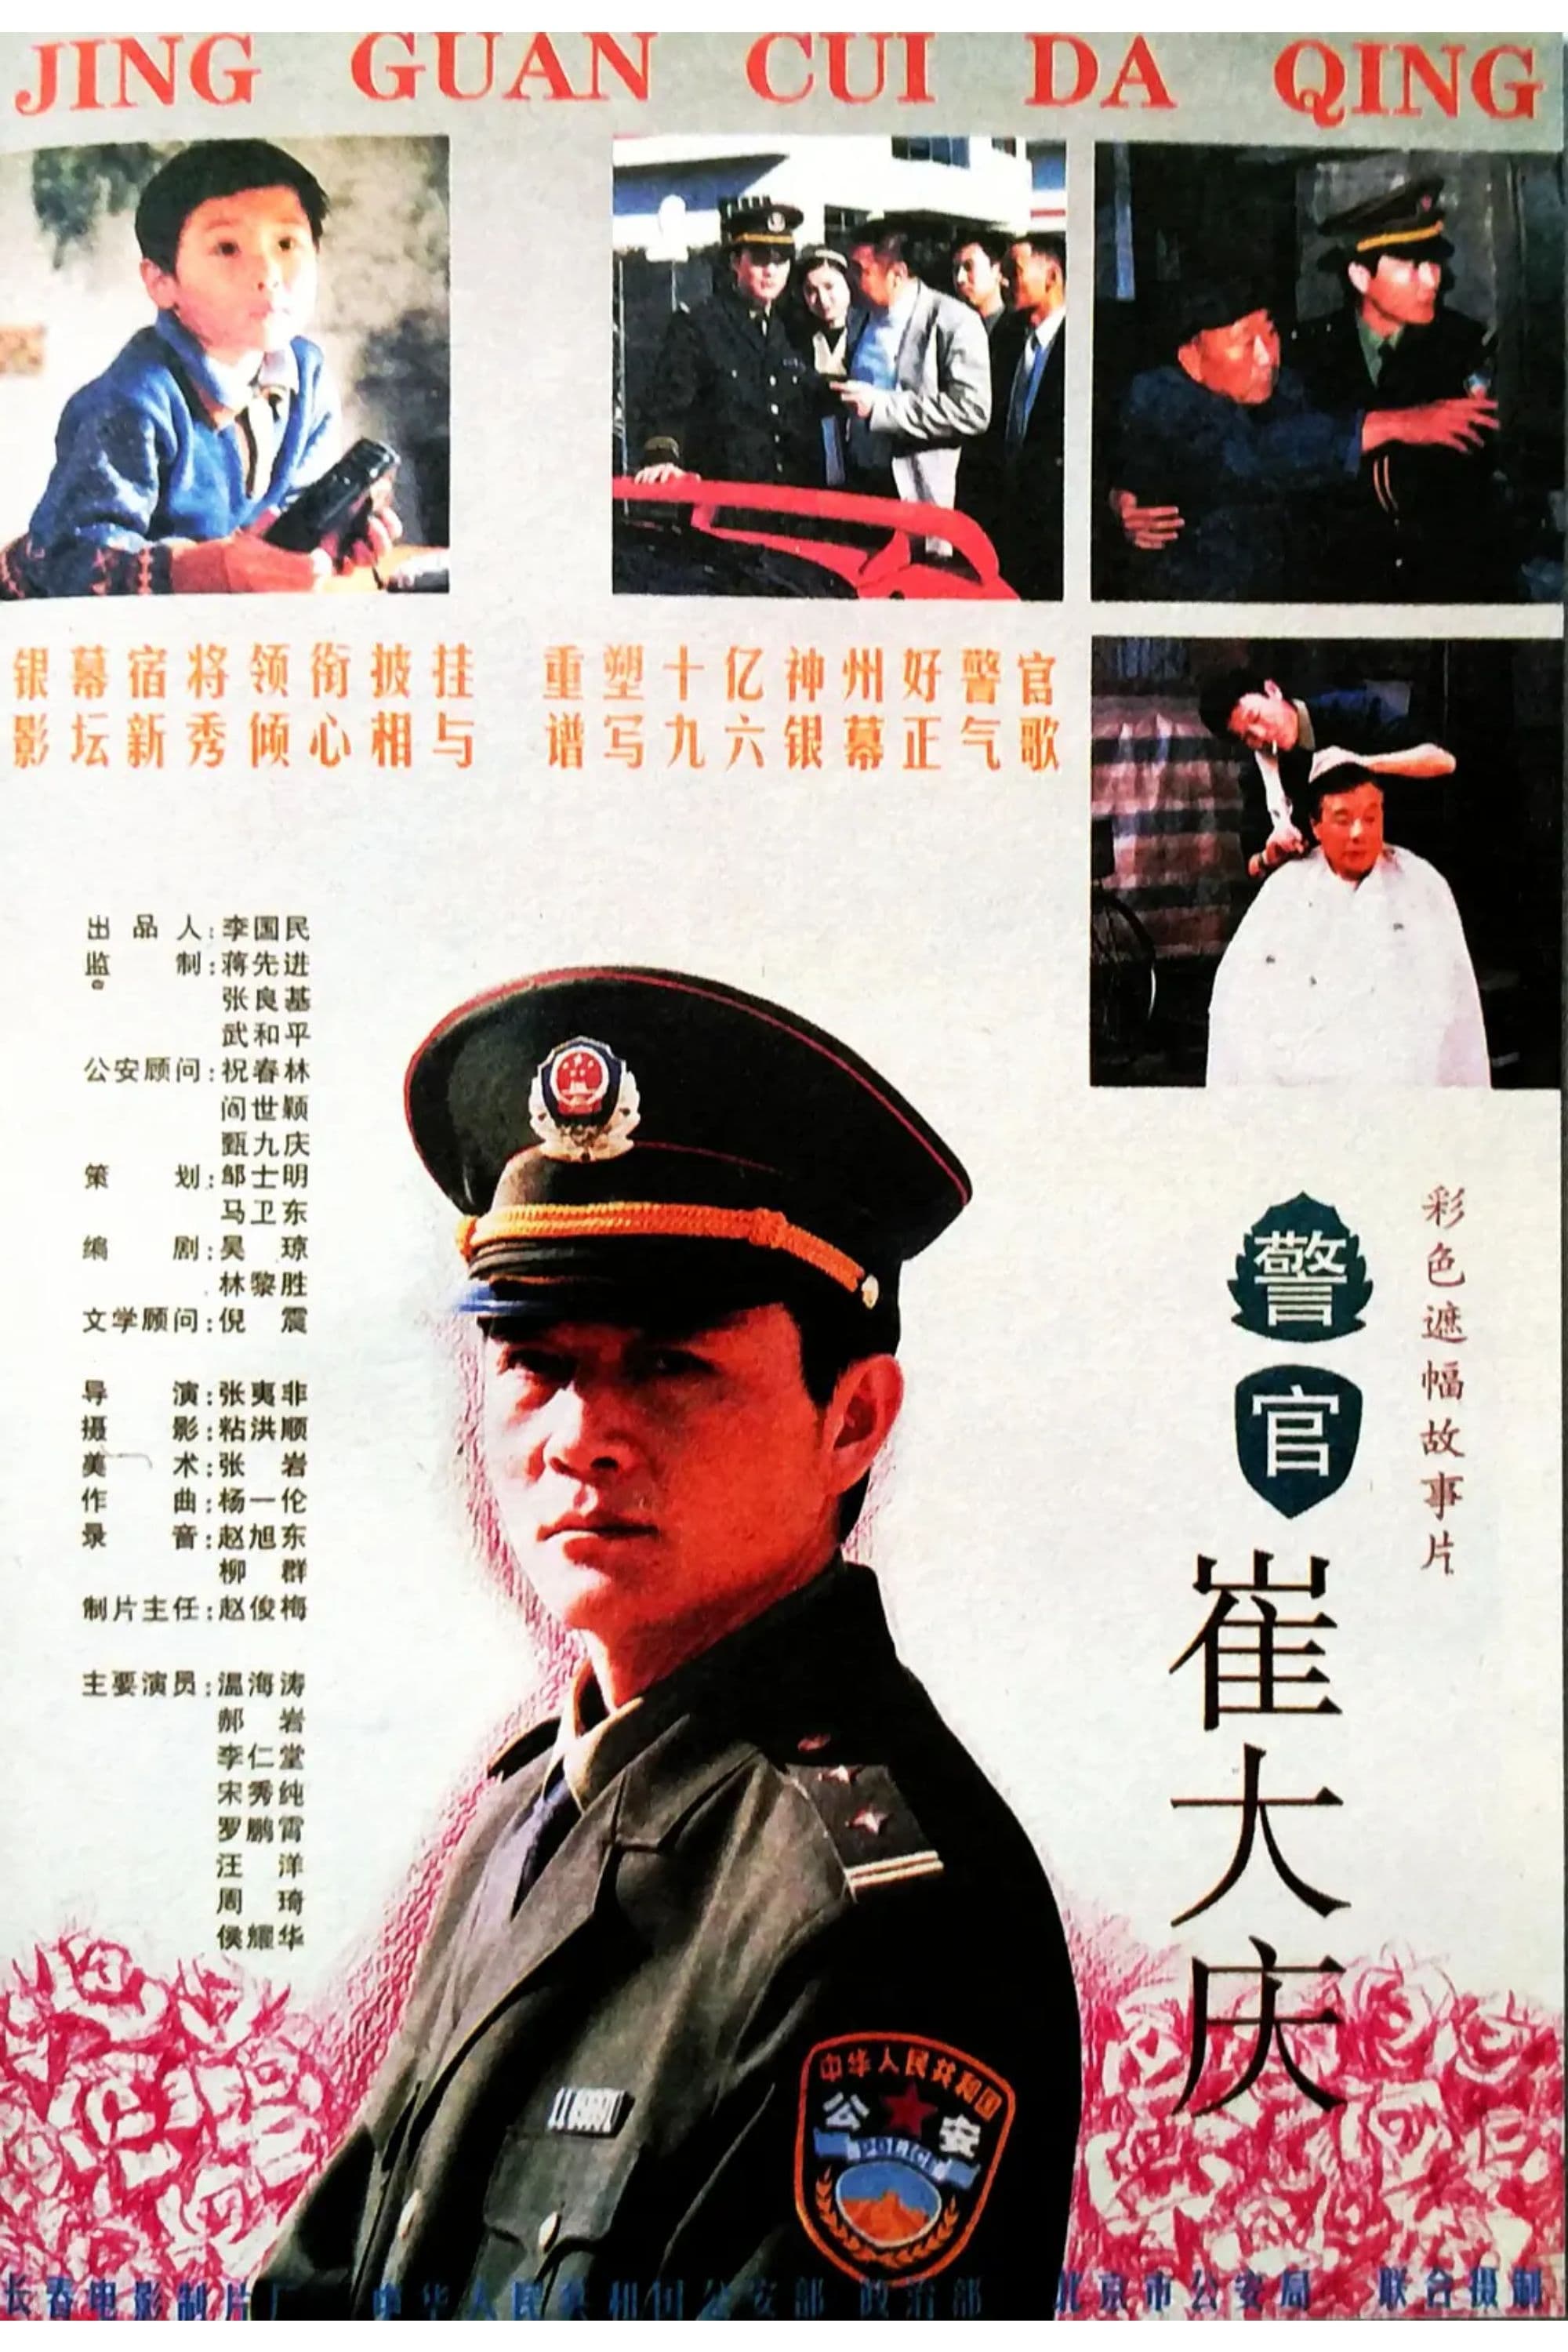 The Police Officer Cui Daqing